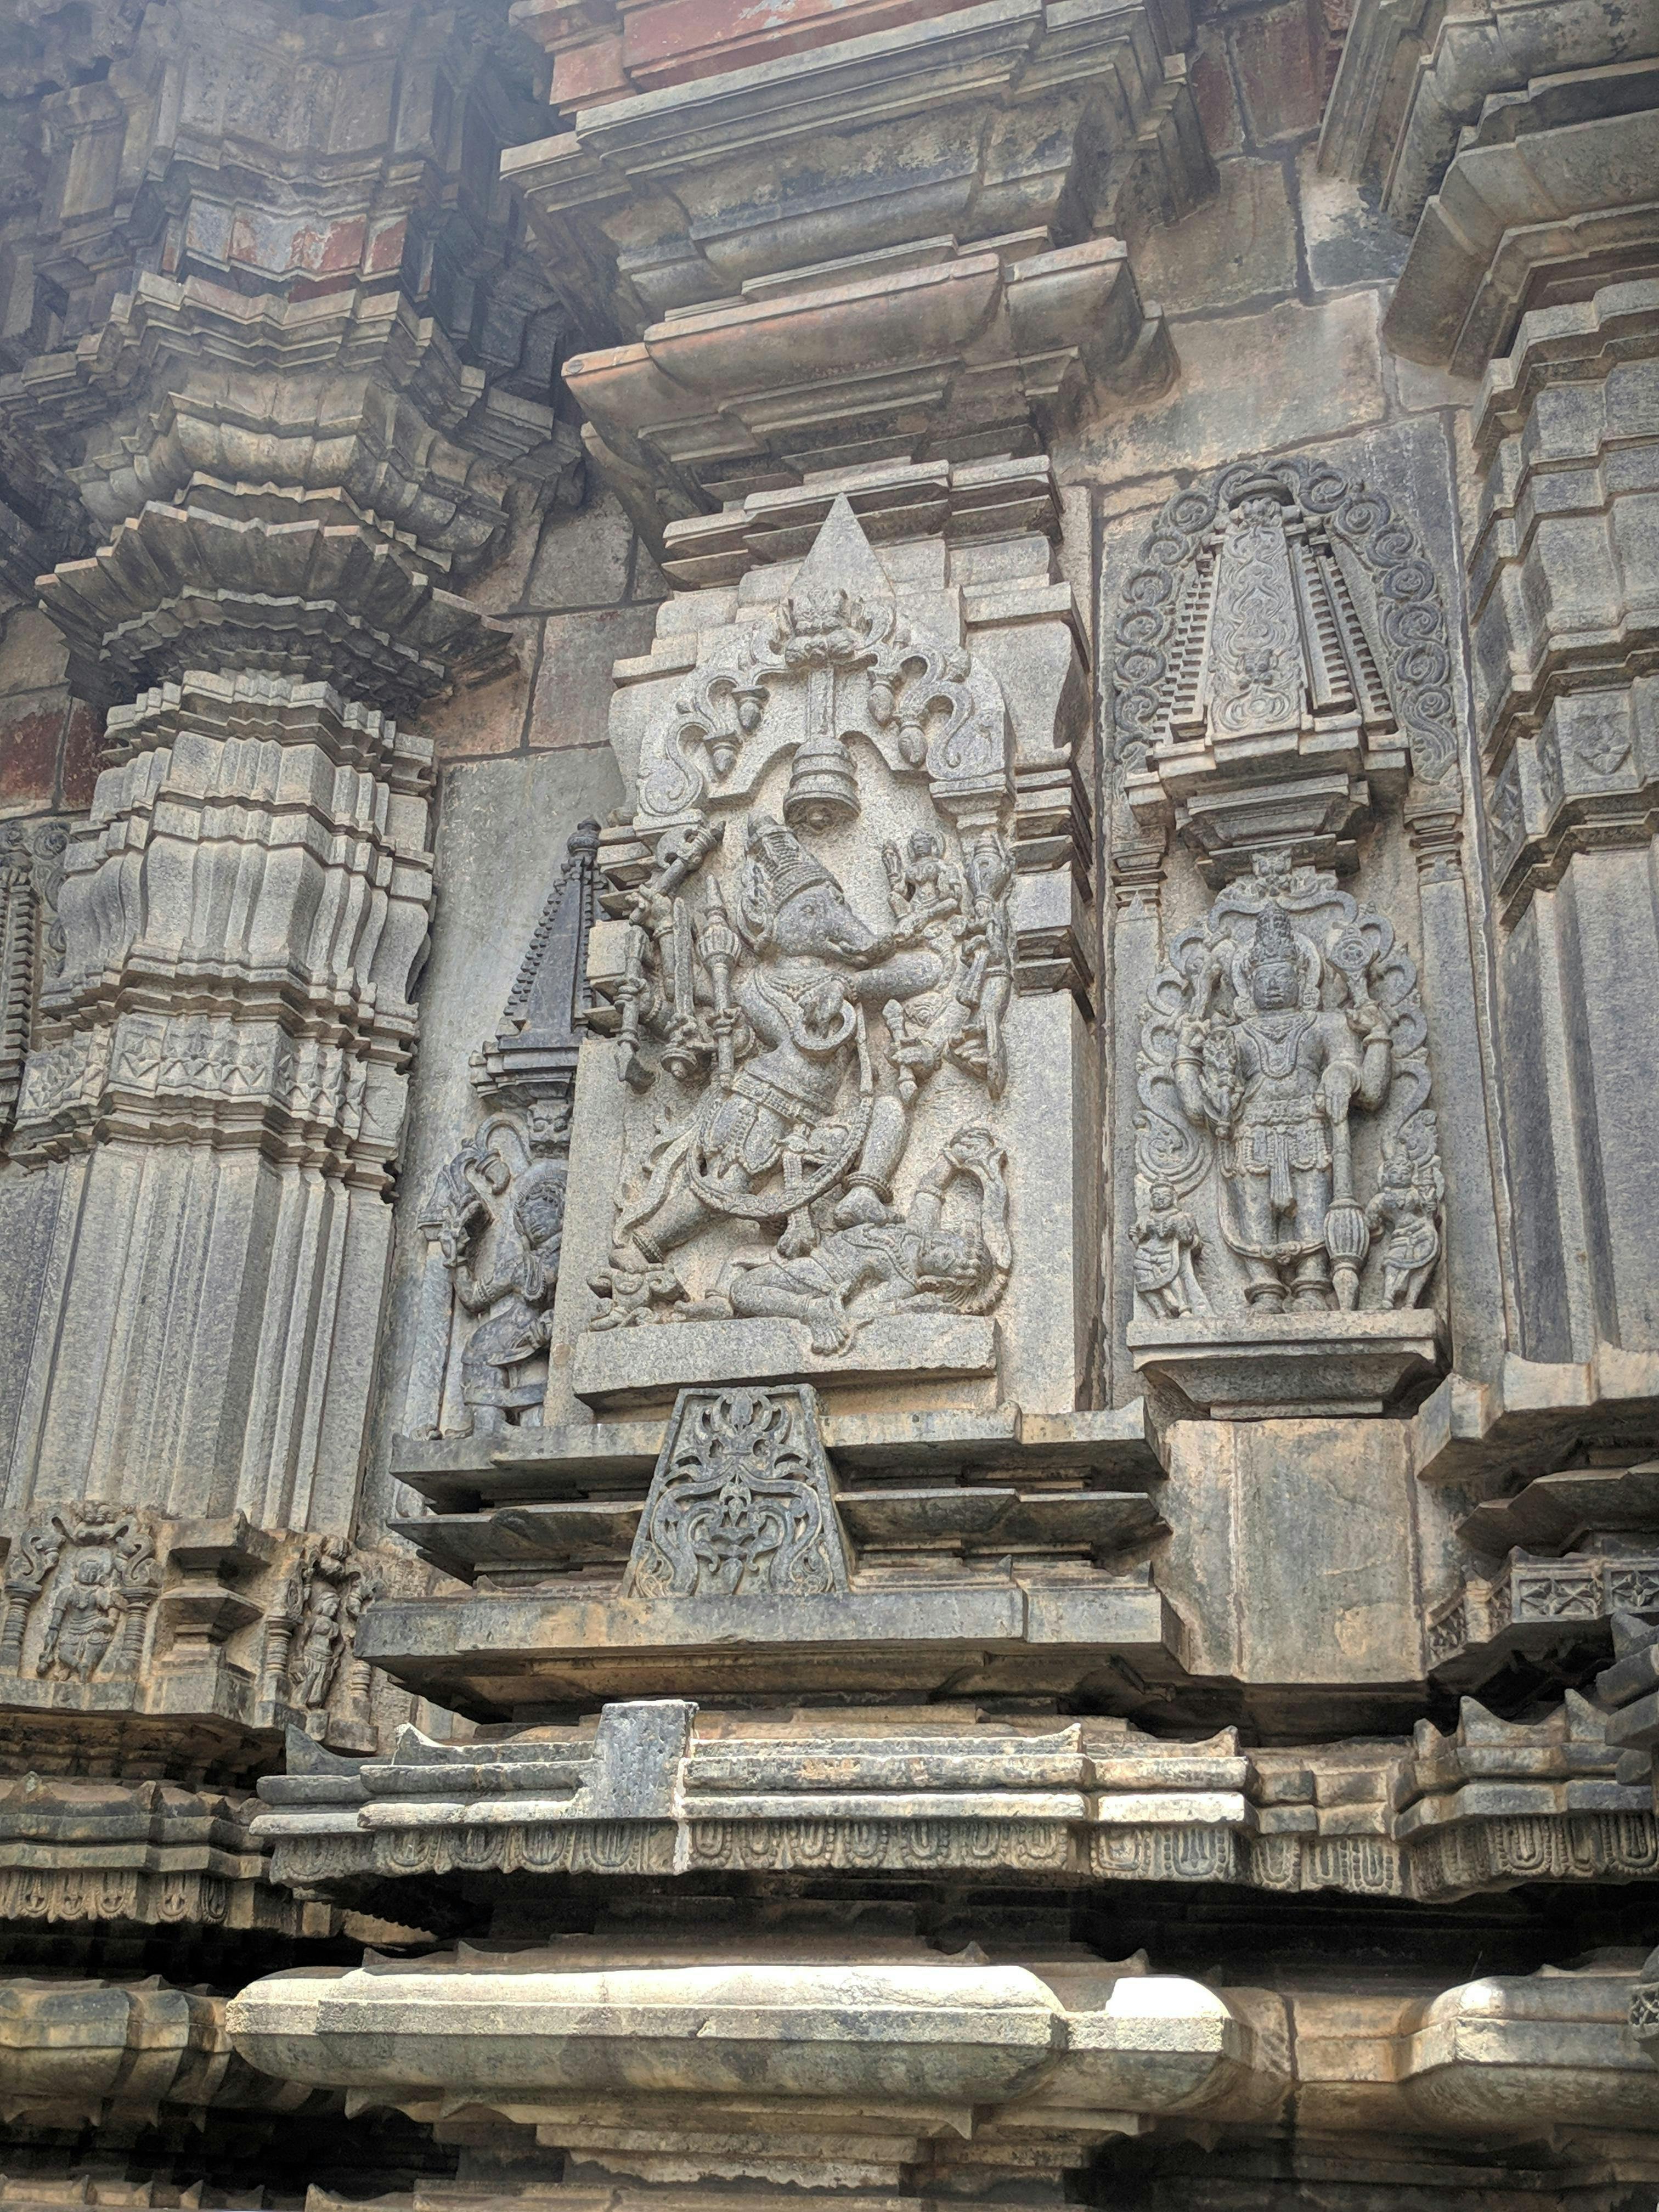 Carvings on walls